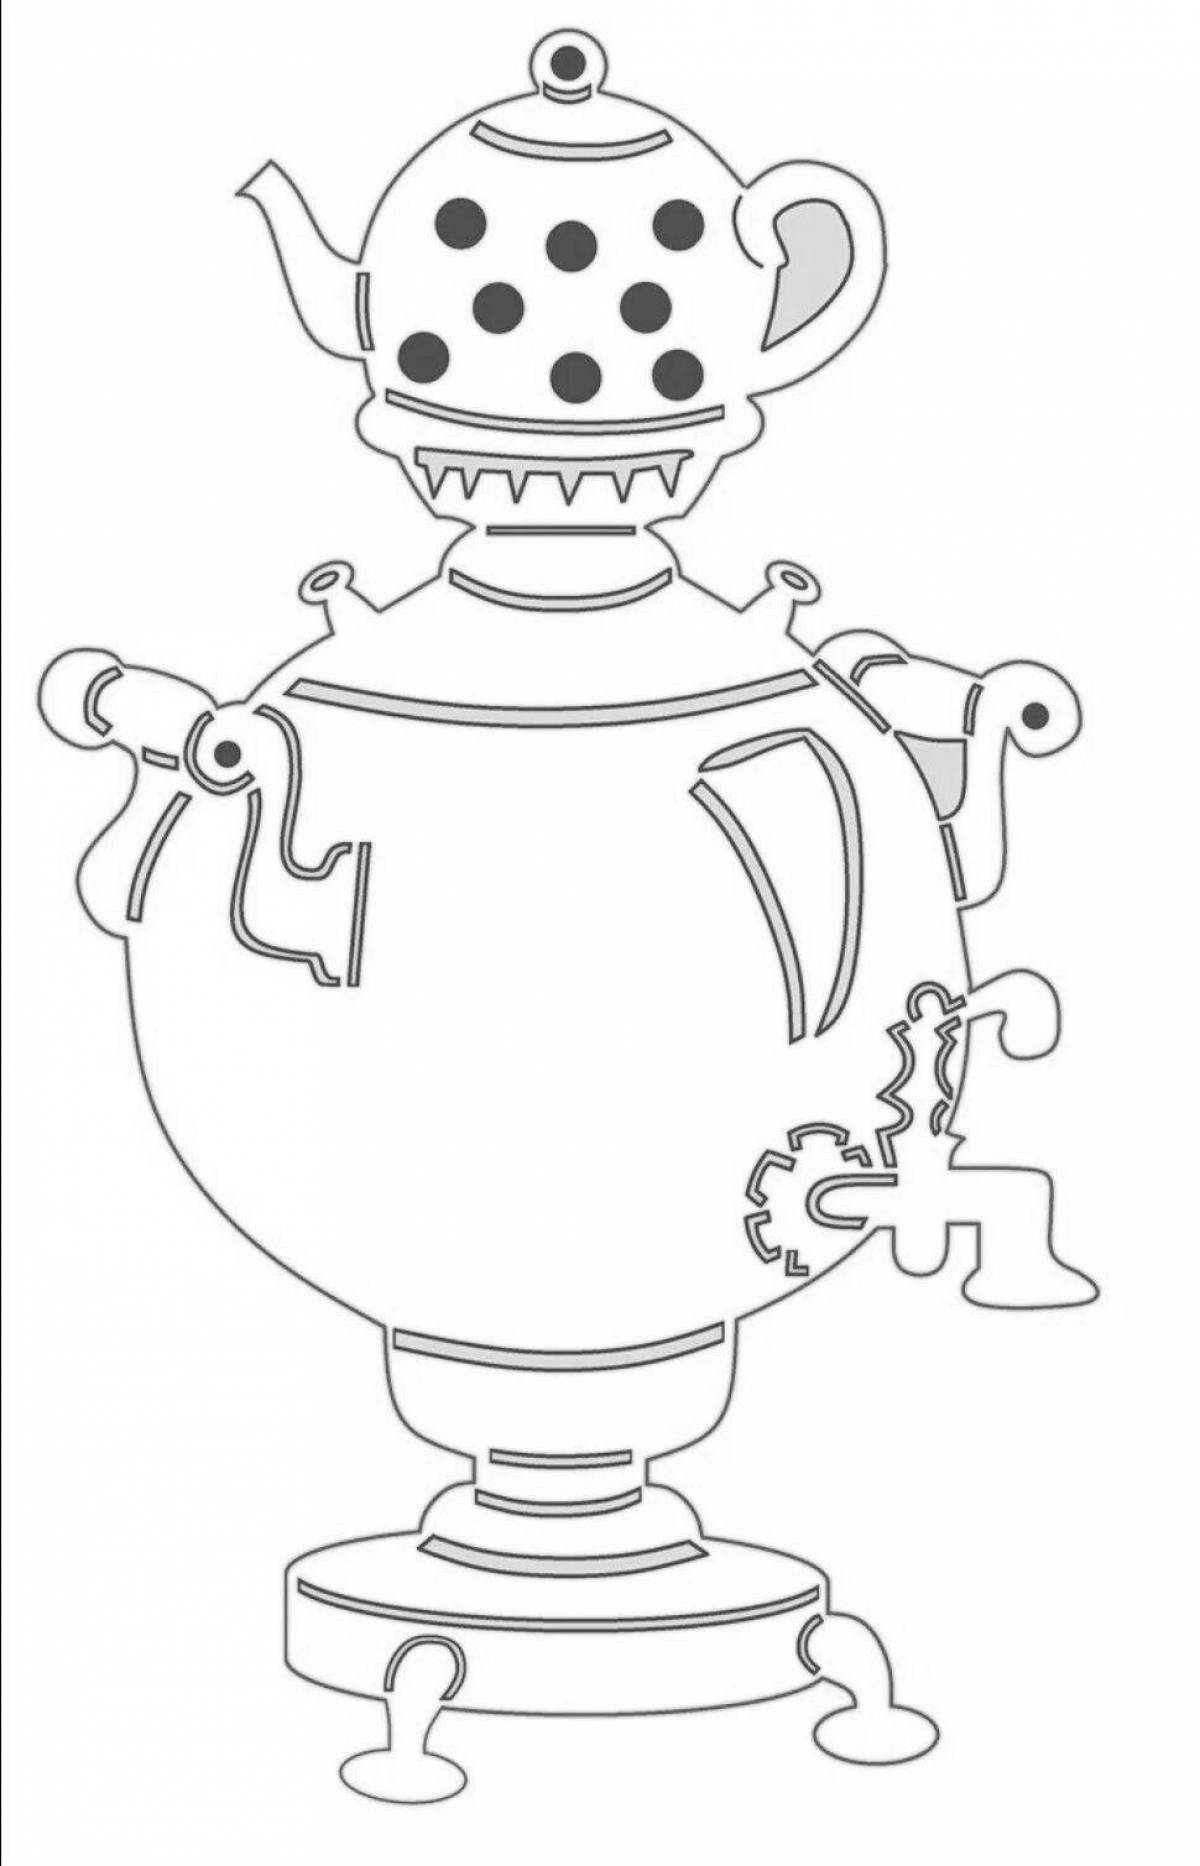 Coloring page spectacular Tula samovar